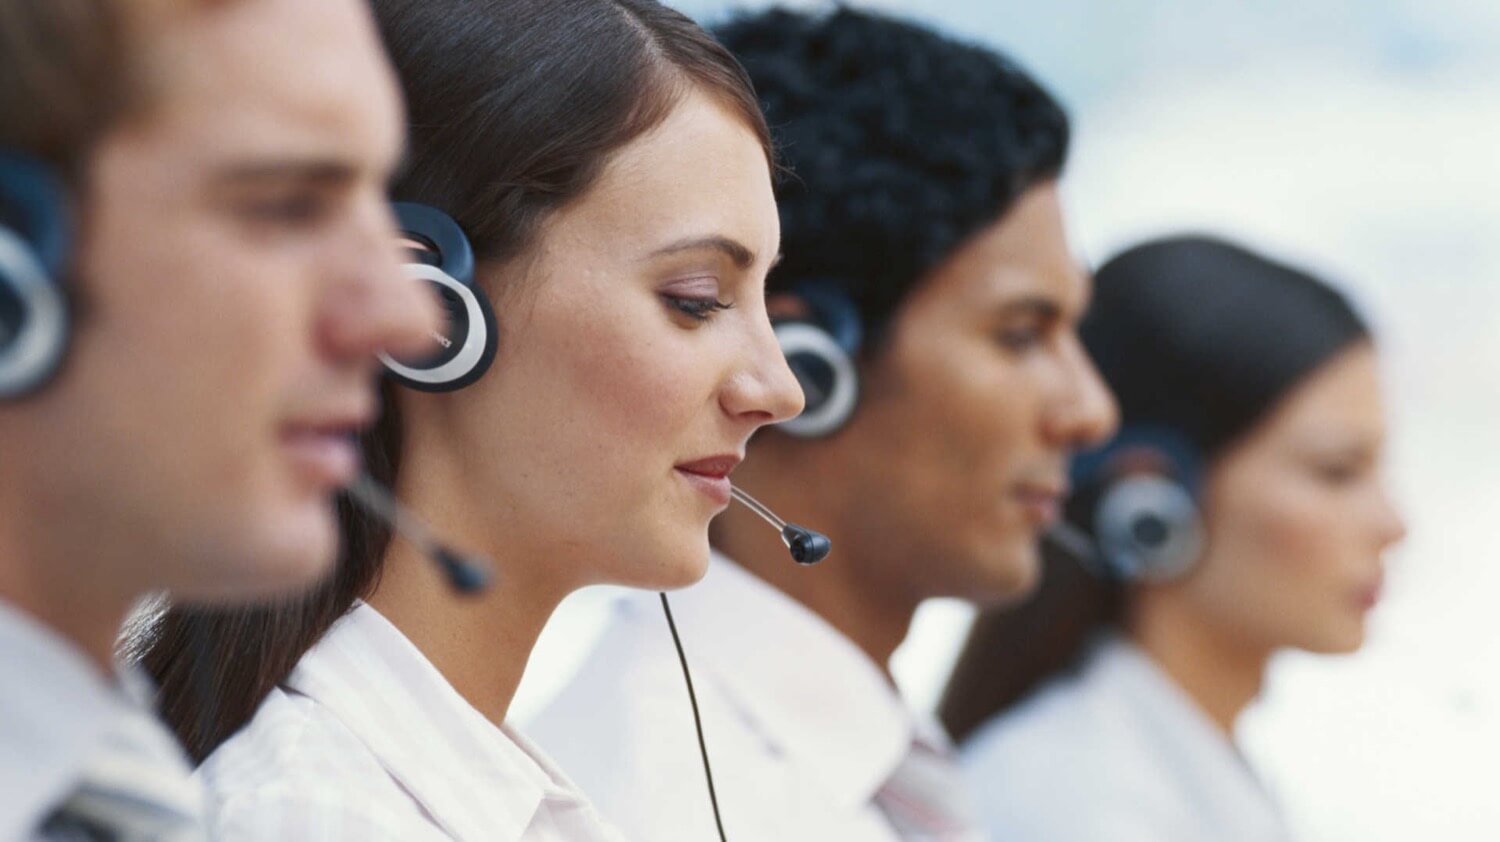 Google demonstrated artificial intelligence for customer support services